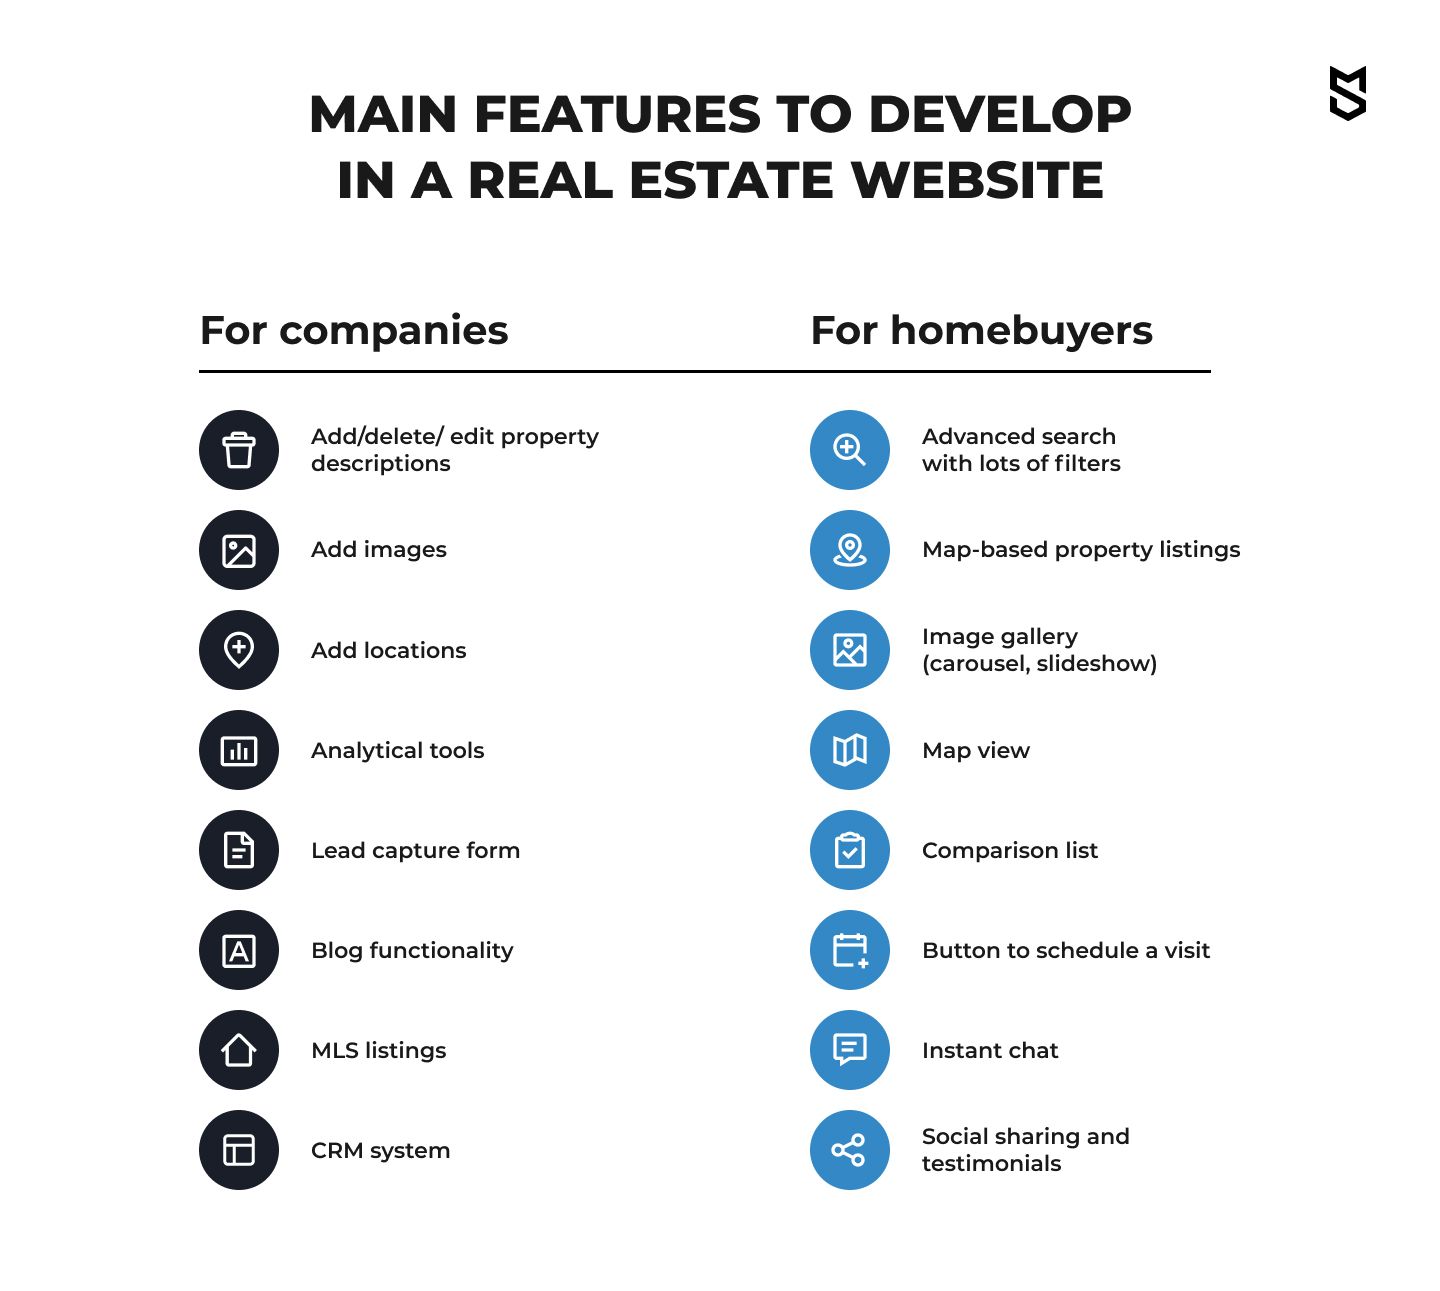 Main features to develop in a real estate website